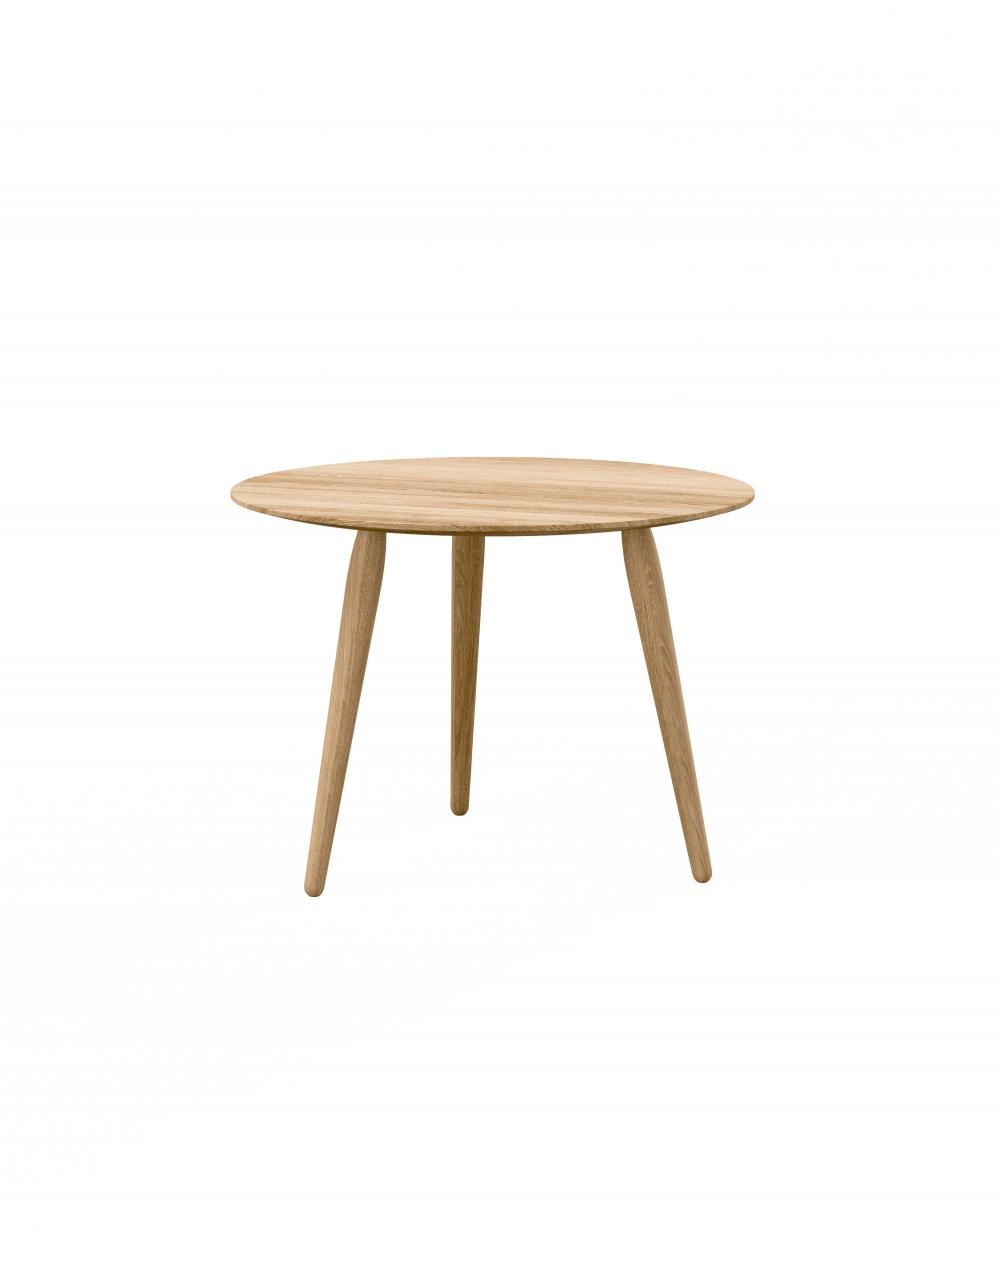 Playround Coffee Table Small Smoked Oak 32cm